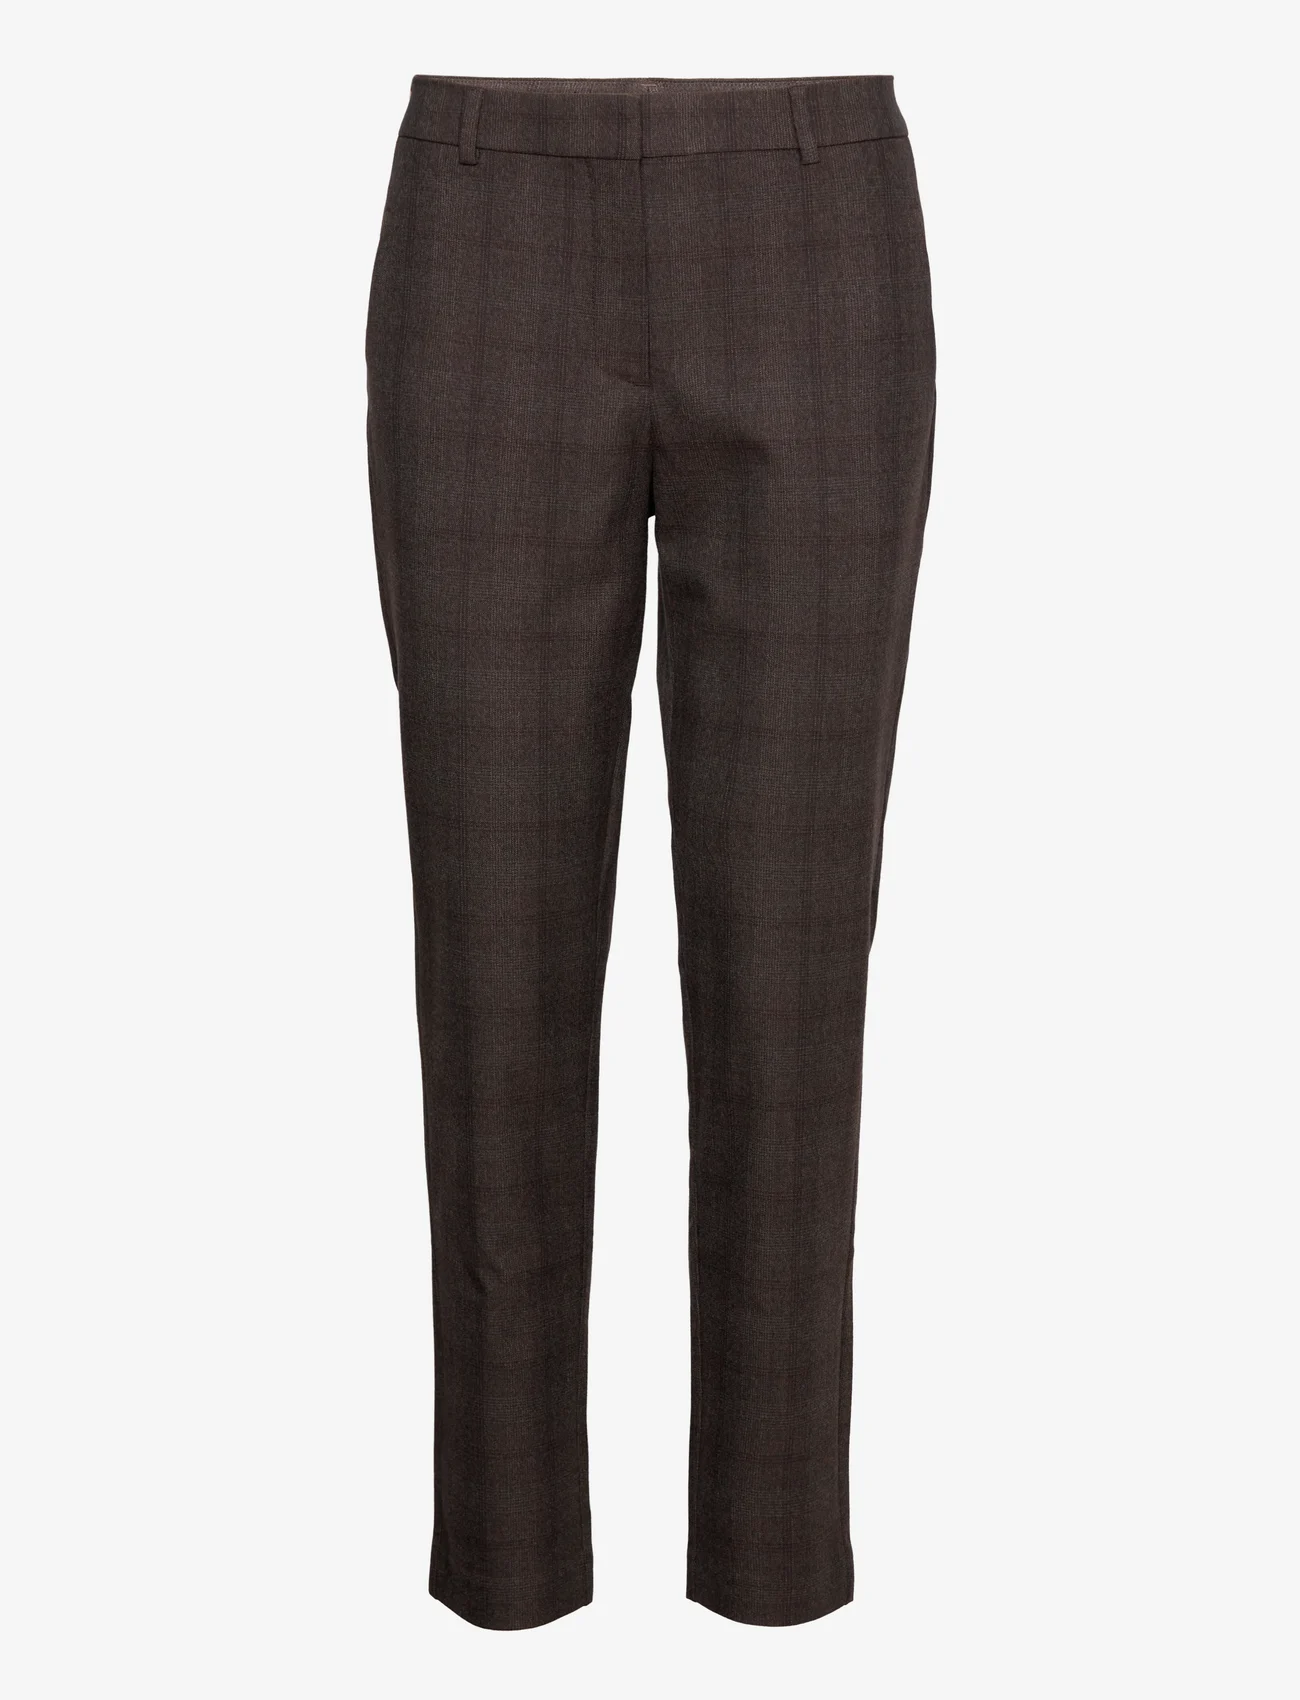 FIVEUNITS - Kylie Crop - tailored trousers - brown check - 0